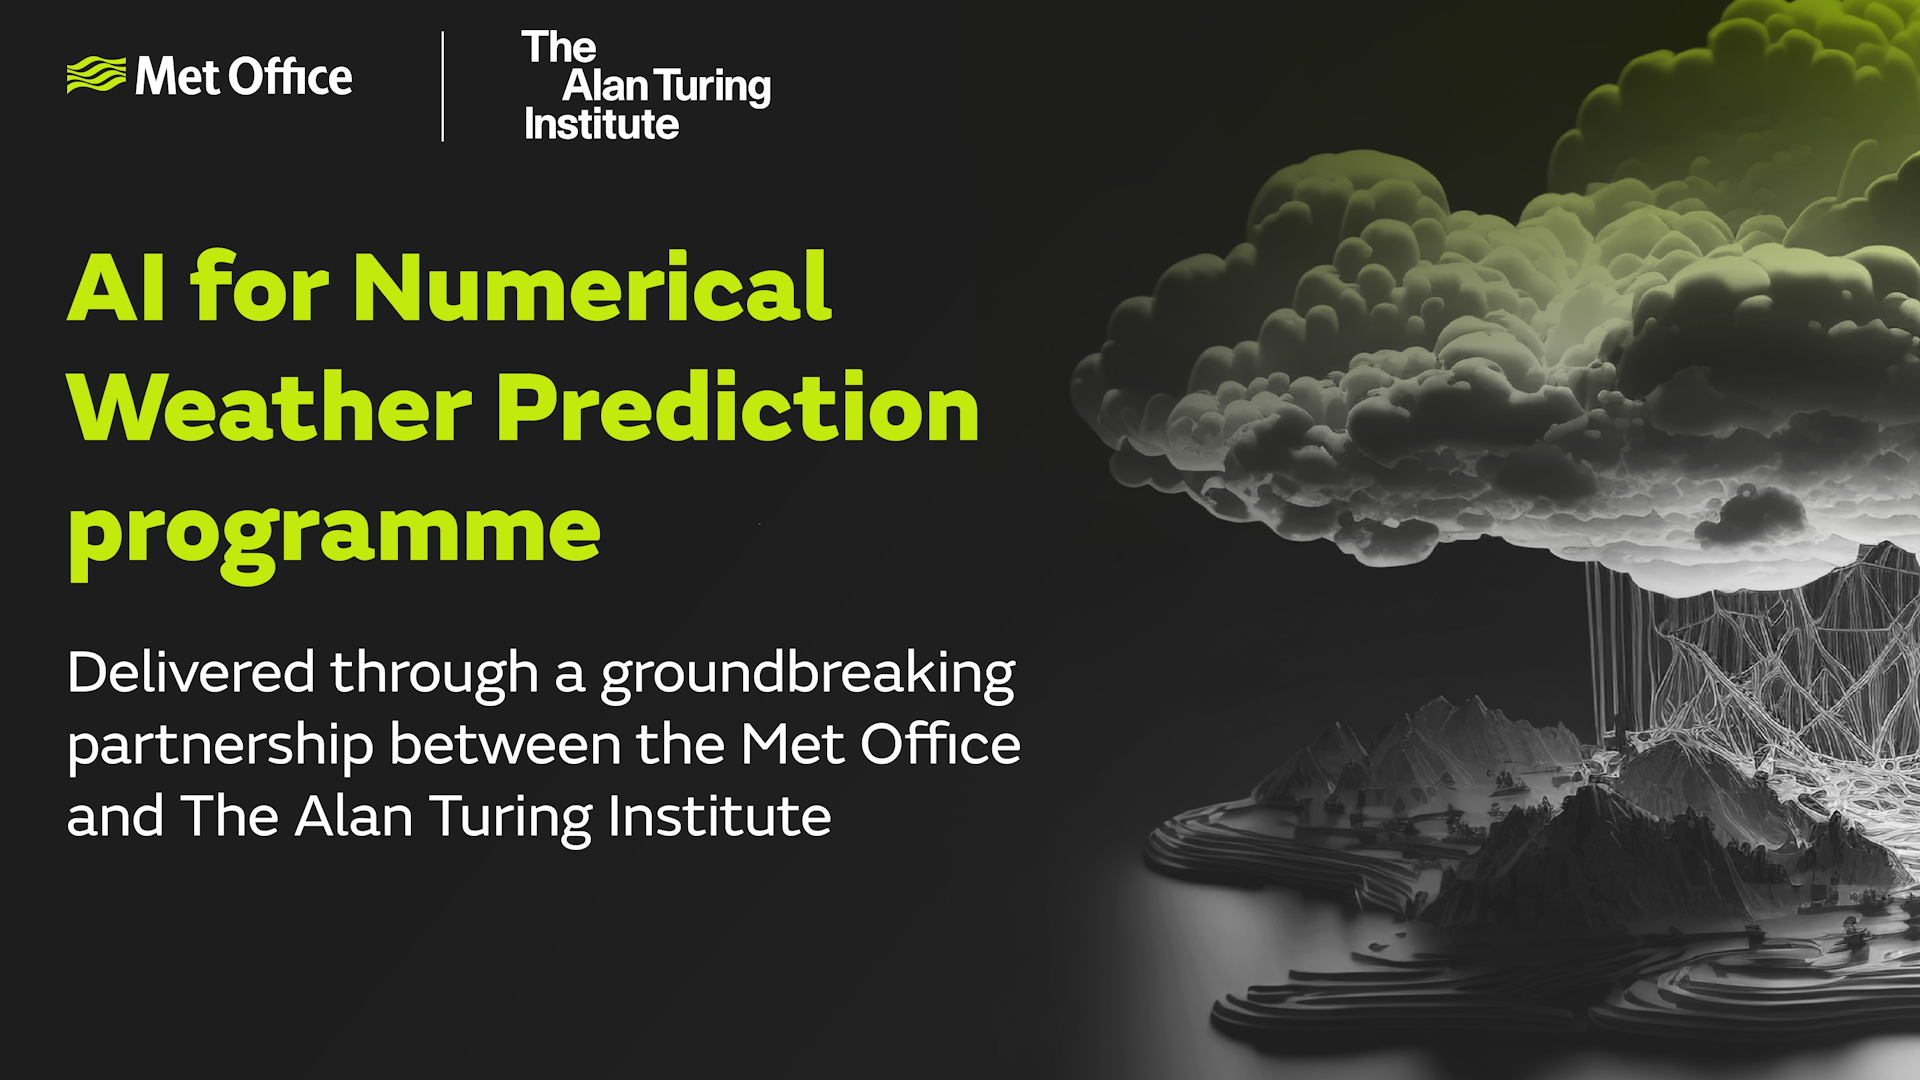 AI for Numerical Weather Prediction programme. Delivered through a groundbreaking partnership between the Met Office and The Alan Turing Institute